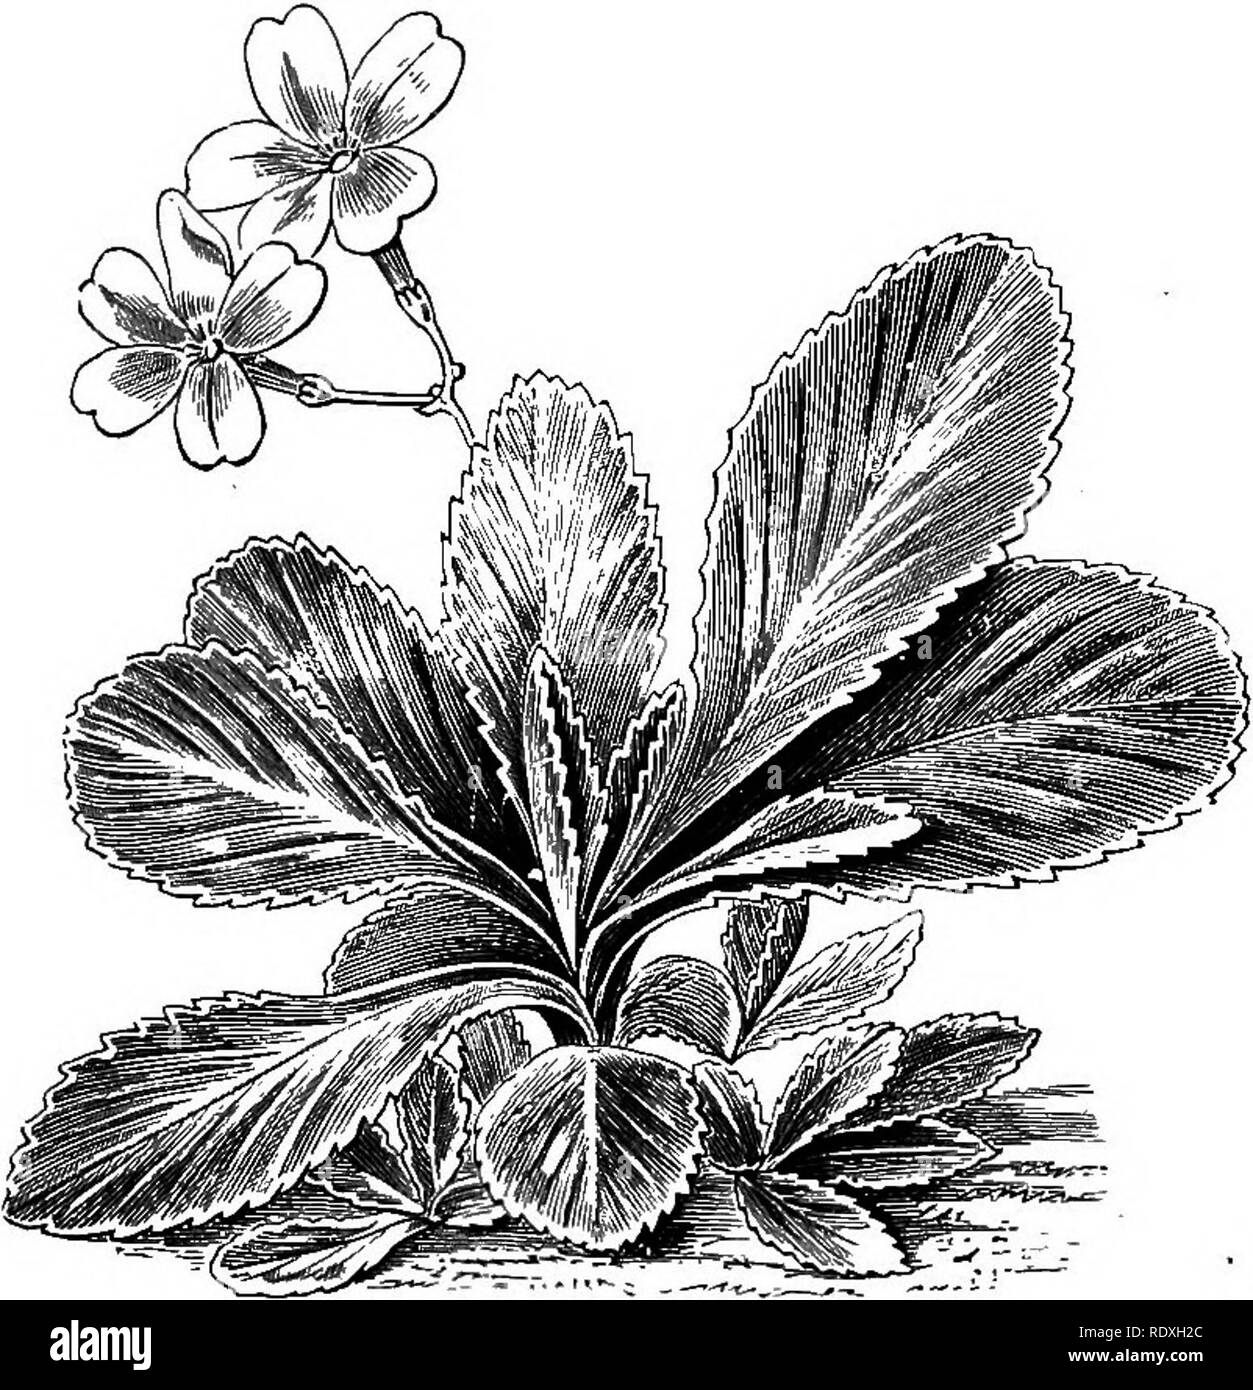 . The Book of gardening; a handbook of horticulture. Gardening; Horticulture. Fig. 177.—Phyteuma Charmelii. ift! high; the flowers are bright yellow, very fragrant, and are produced from May to August. Phlox is a genus yielding several dwarf perennial species suitable for the rock garden, such as P. amcena and P. subulata, which are treated under &quot; Spring- Bedding Plants.&quot; Phyteumas are charming plants for sunny situations; they are increased by seeds or by division. P. Michelii grows 6in. high, and bears heads of reddish flowers during June and July. P. orbiculare grows ift. high, a Stock Photo